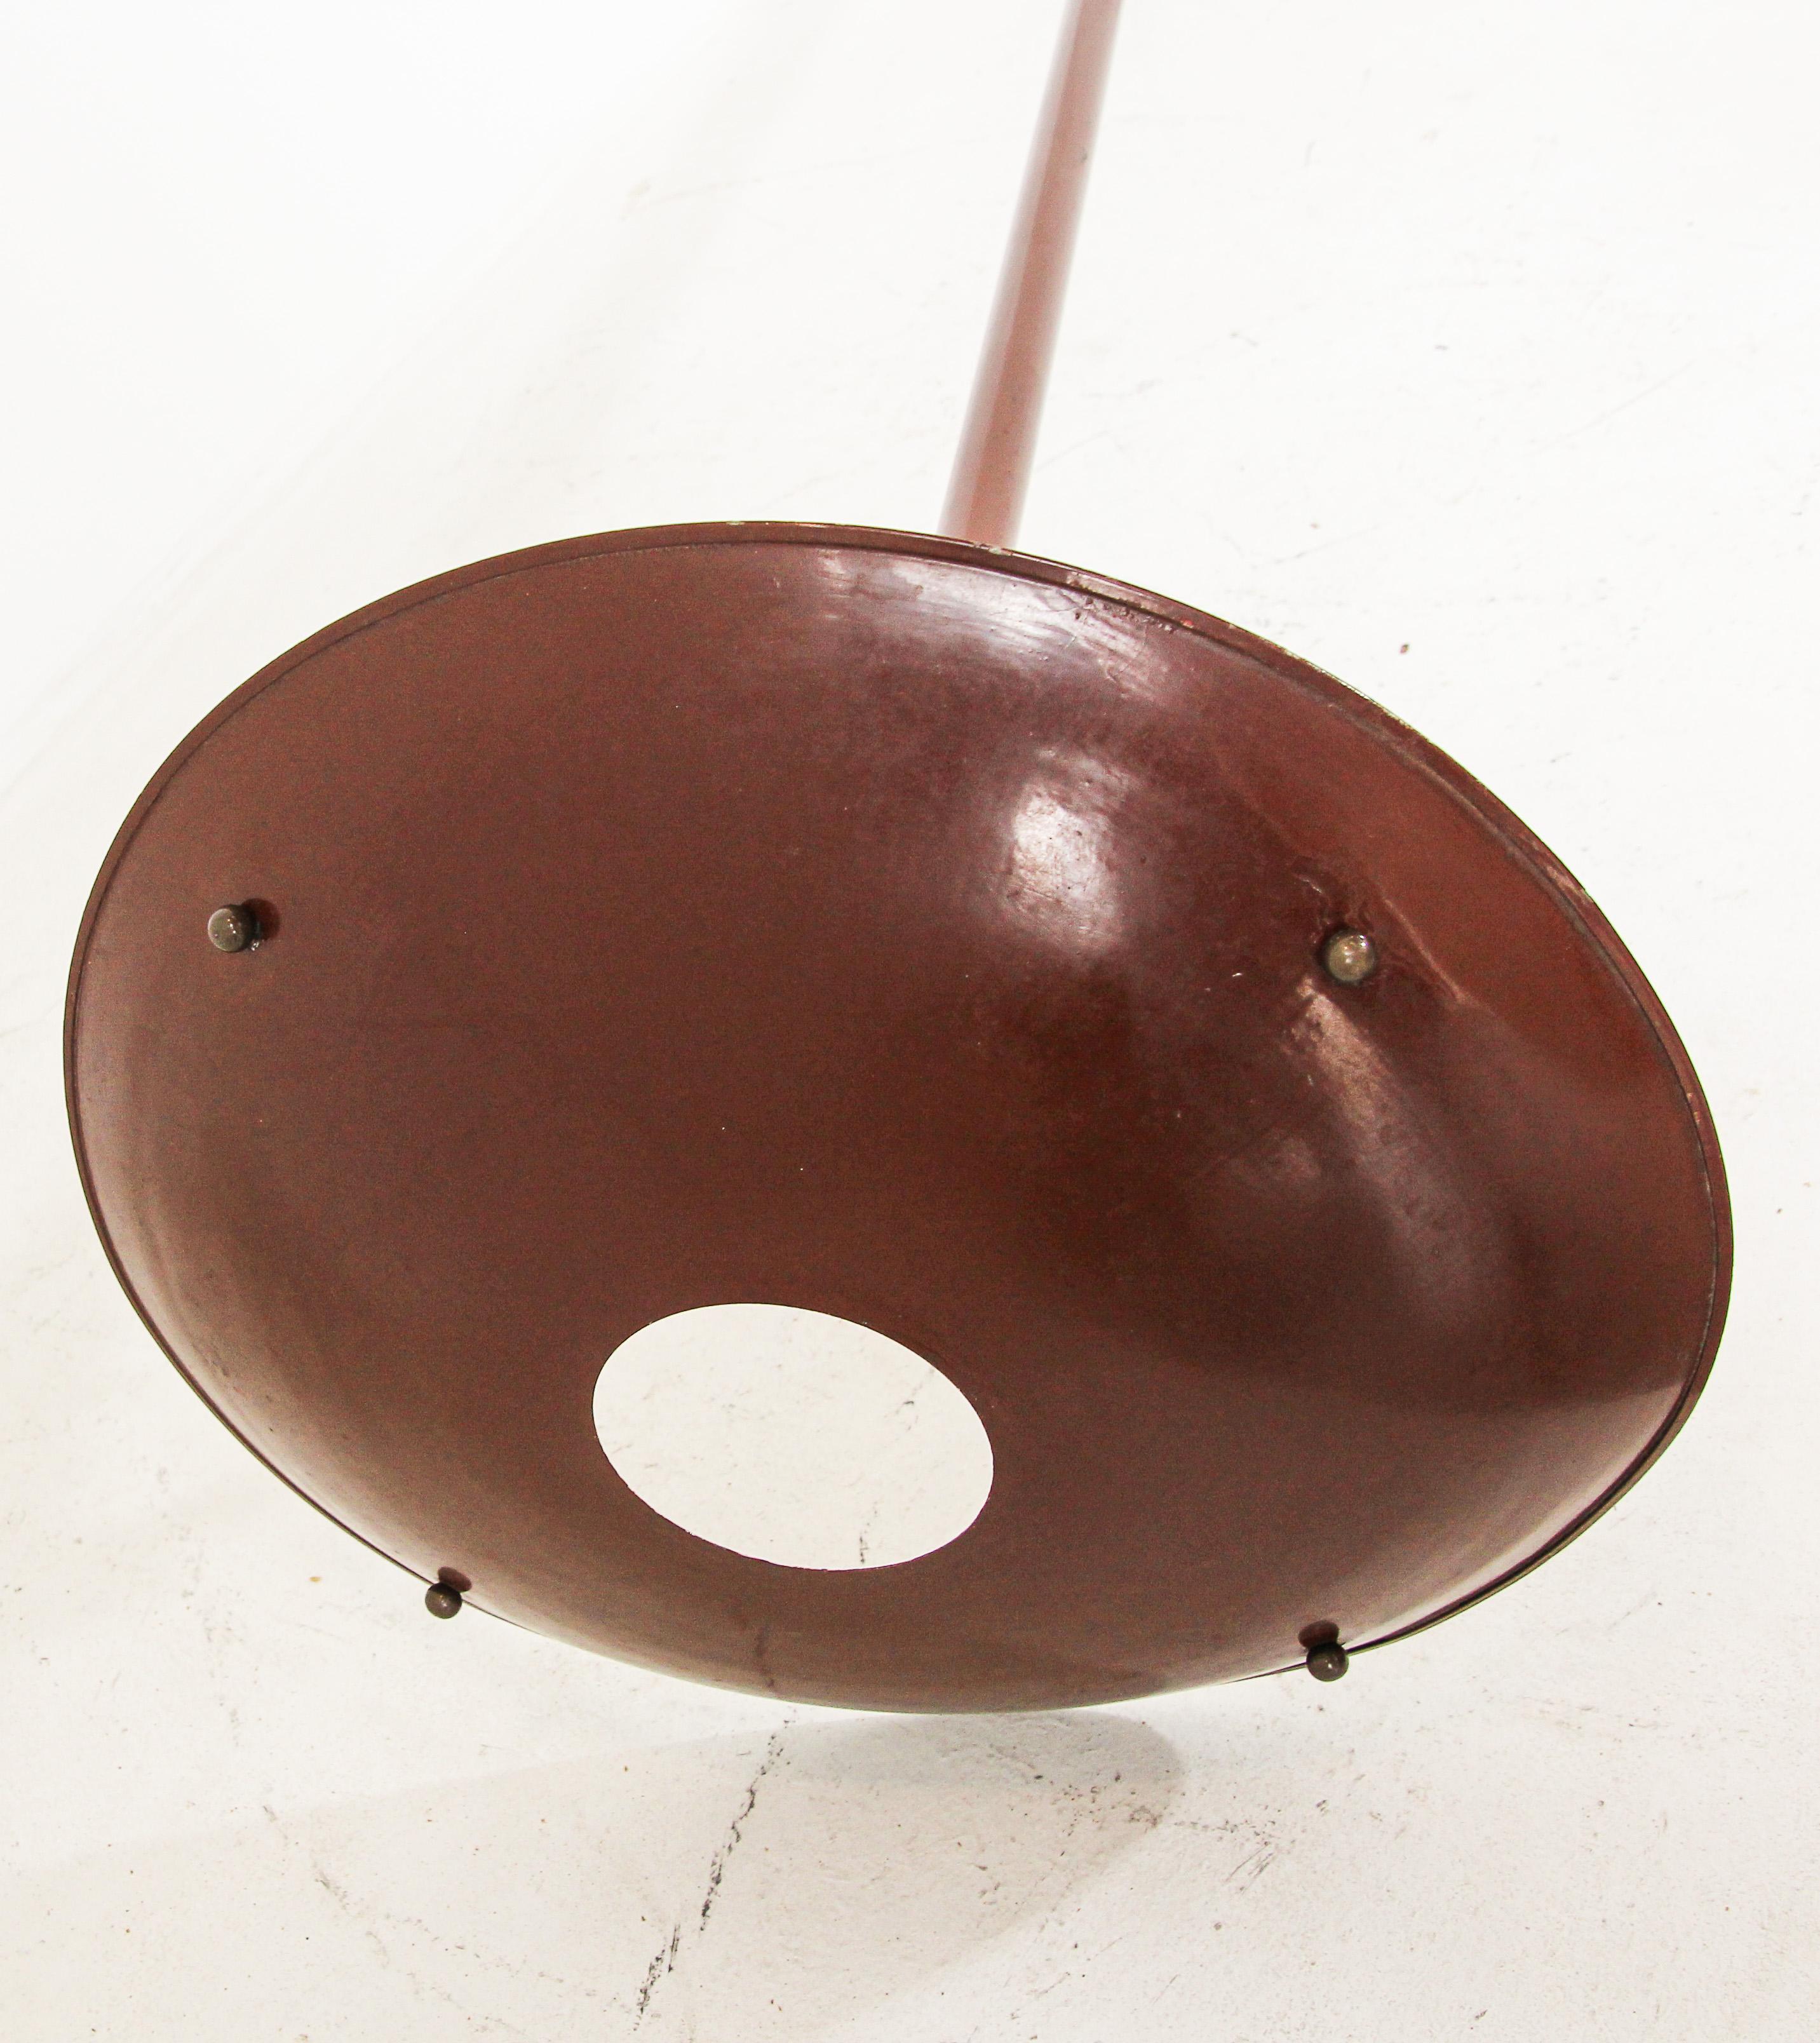 Vintage Sculptural French Tripod Floor Lamp Brown Enamel Shade, 1950s For Sale 5